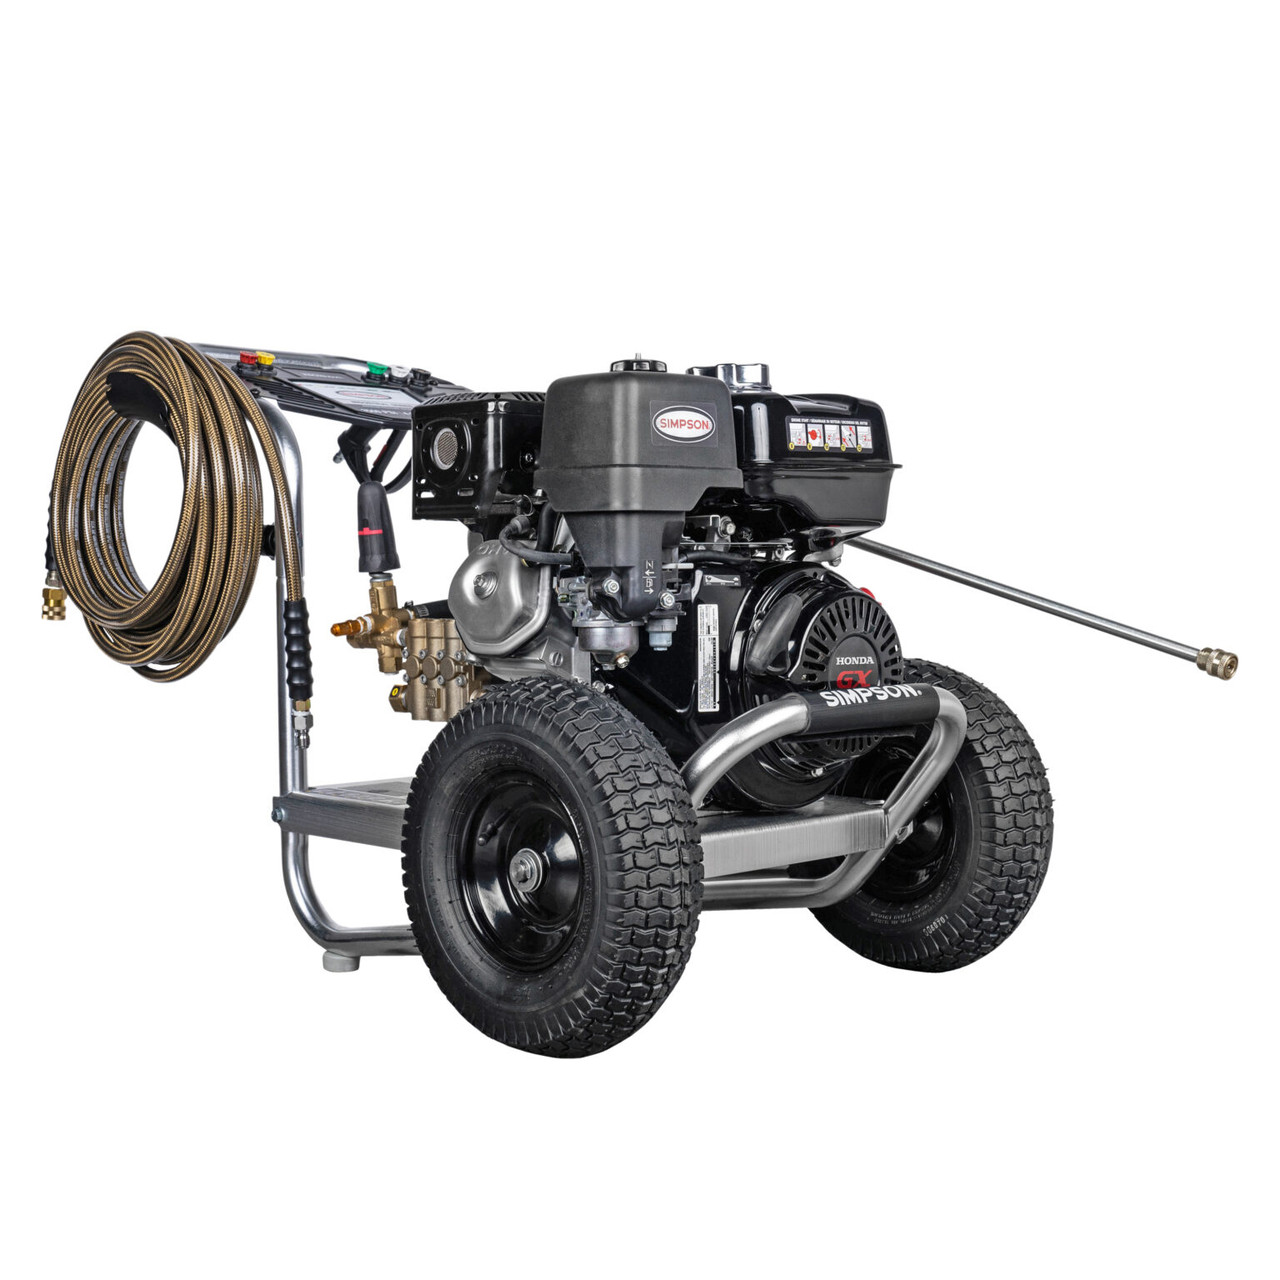 SIMPSON Industrial Series IR61026 Gas Professional Pressure Washer 3500 PSI at 4.0 GPM